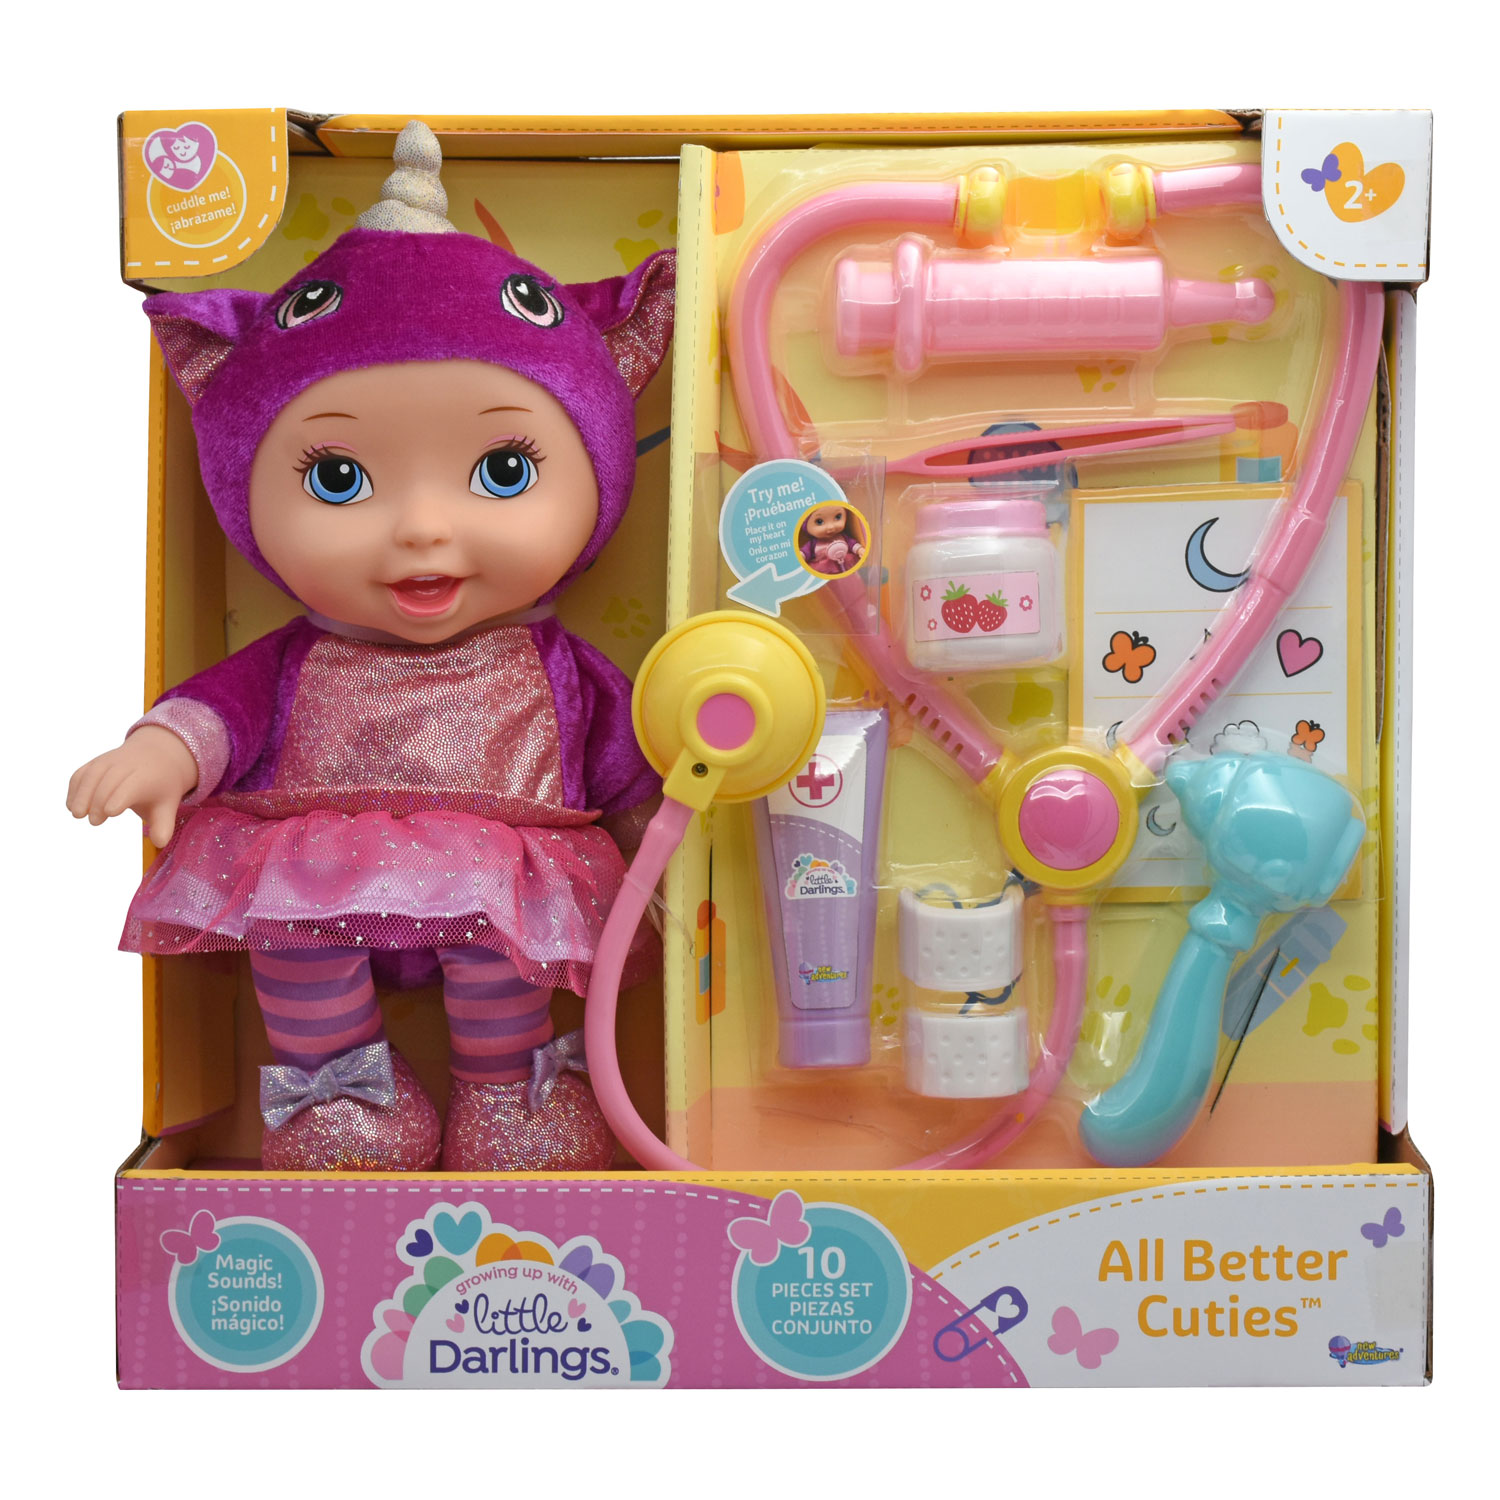 Little Darlings, All Better Cuties doll with unicorn medical kit